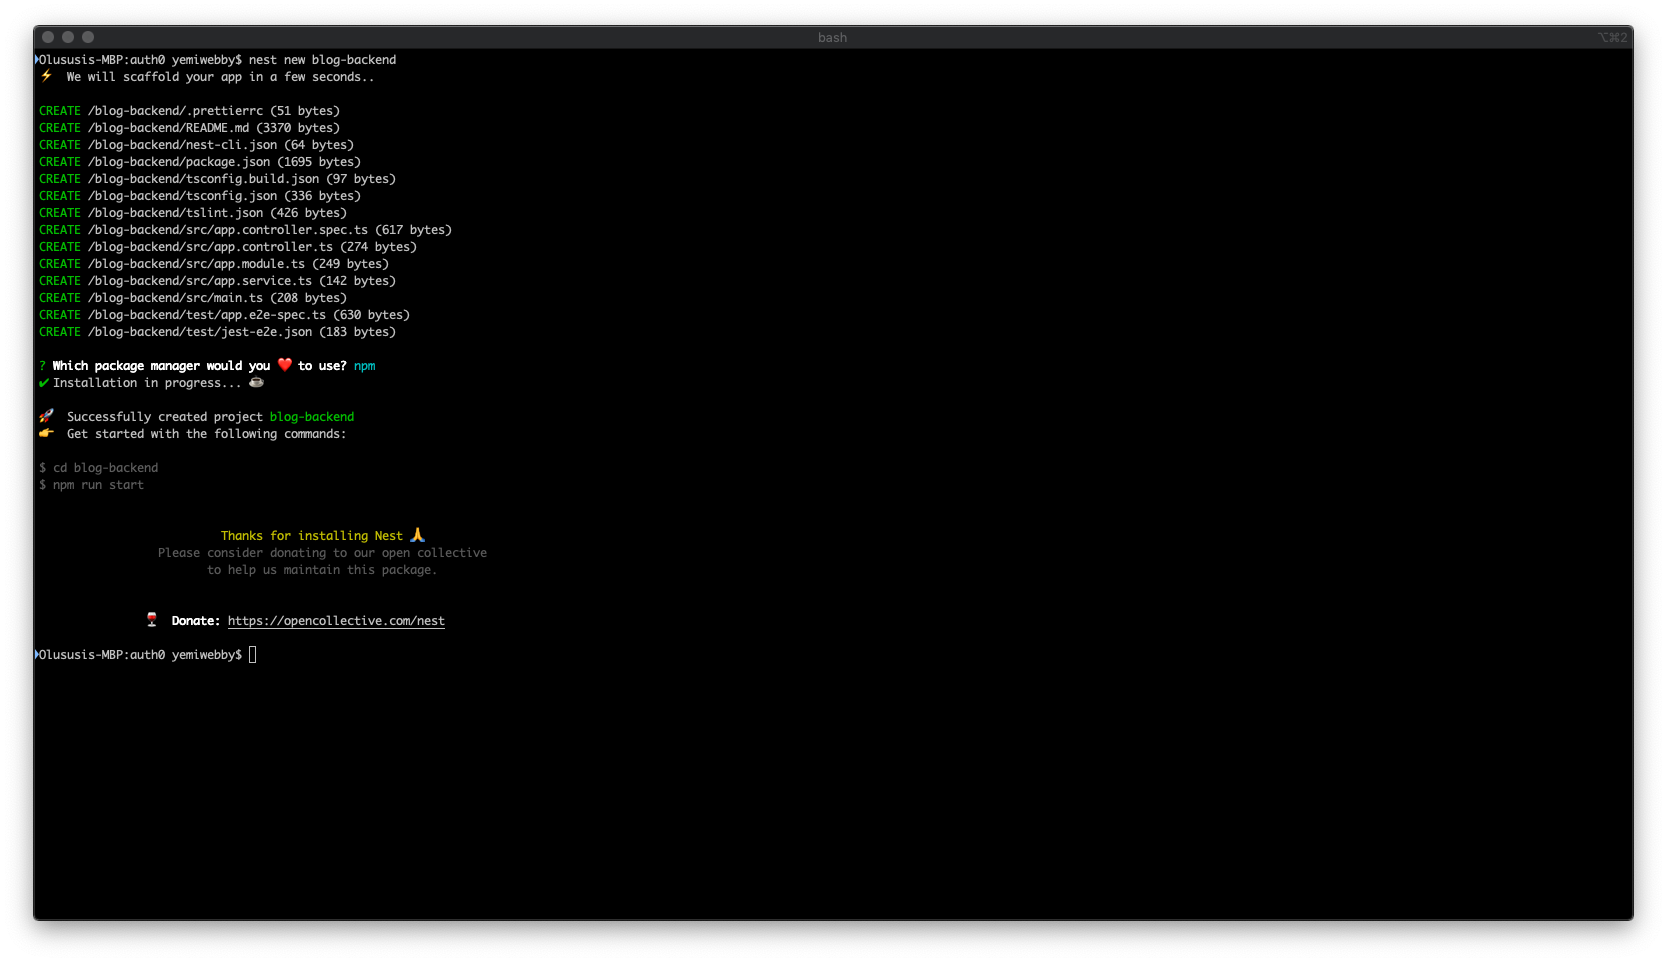 Terminal view of installing Nest.js